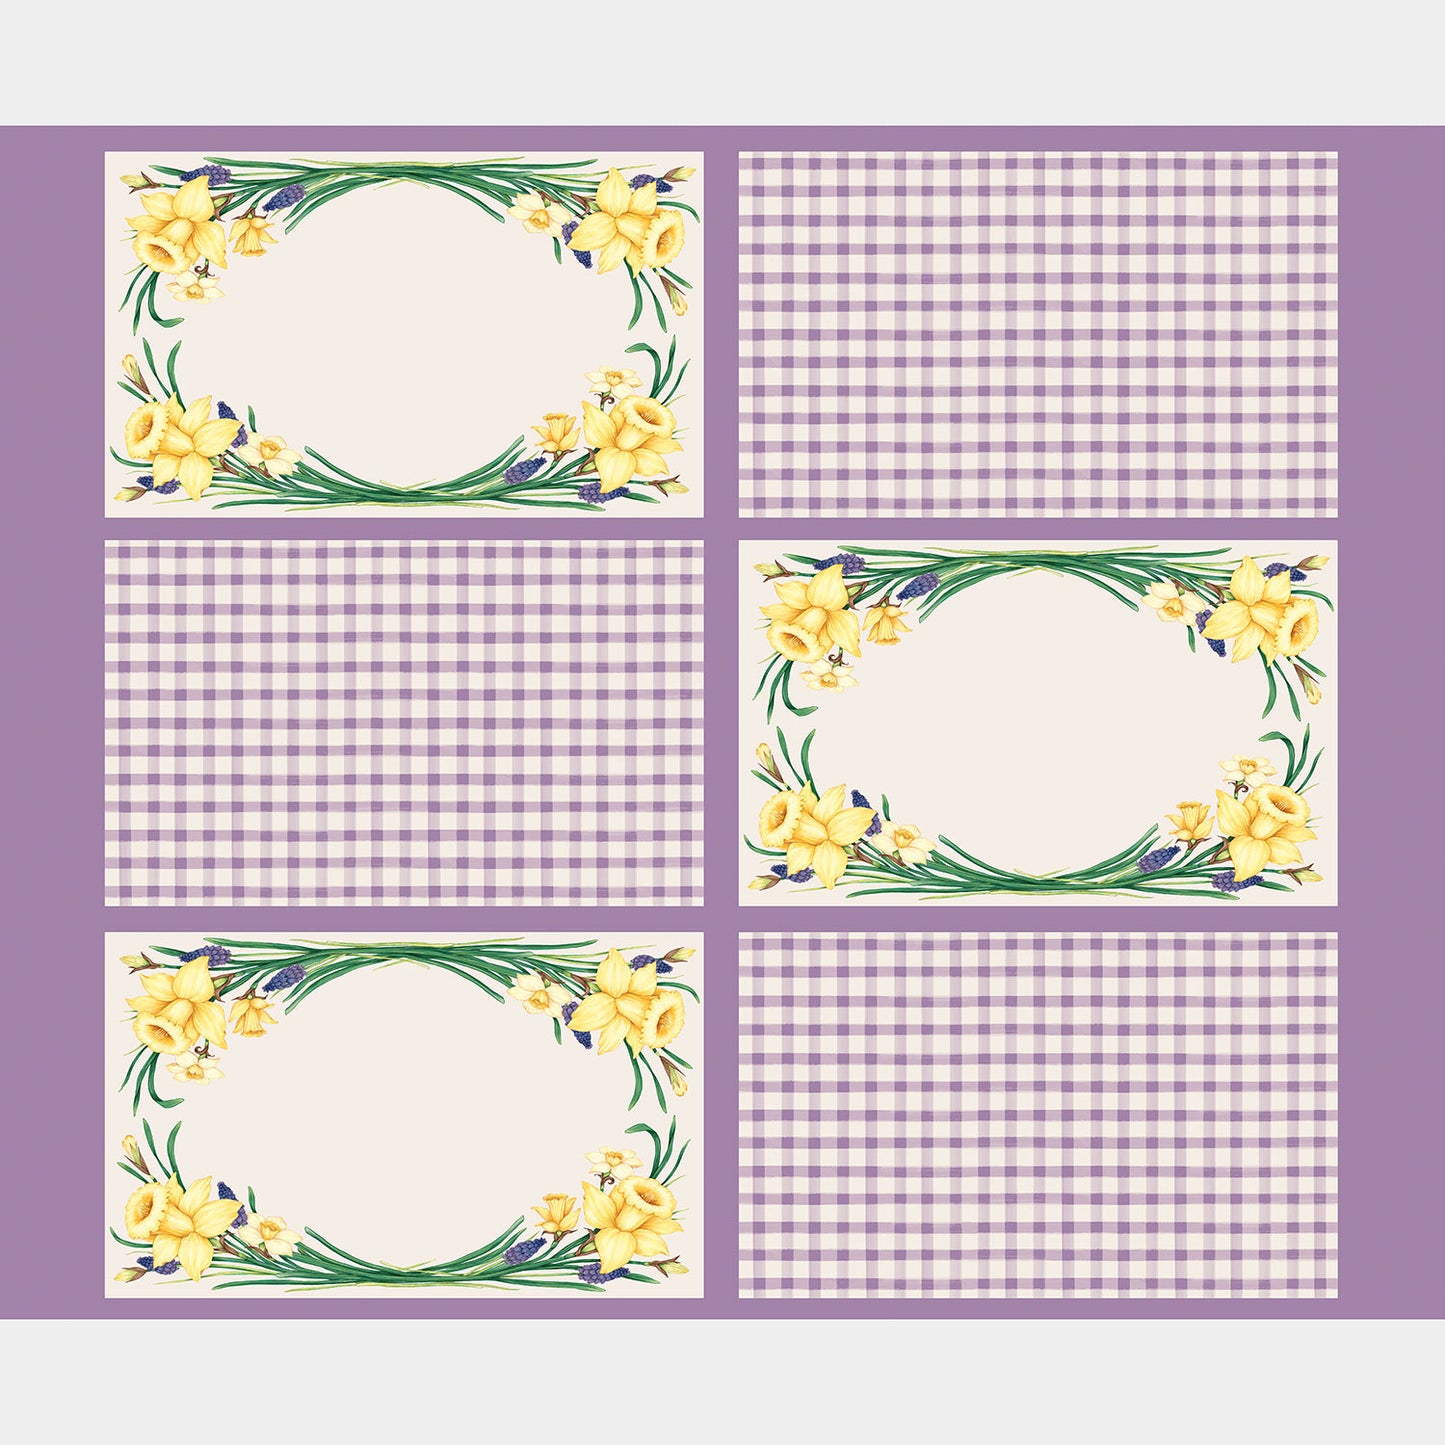 Monthly Placemat Panels - April Daffodil Purple Placemat Panel Primary Image